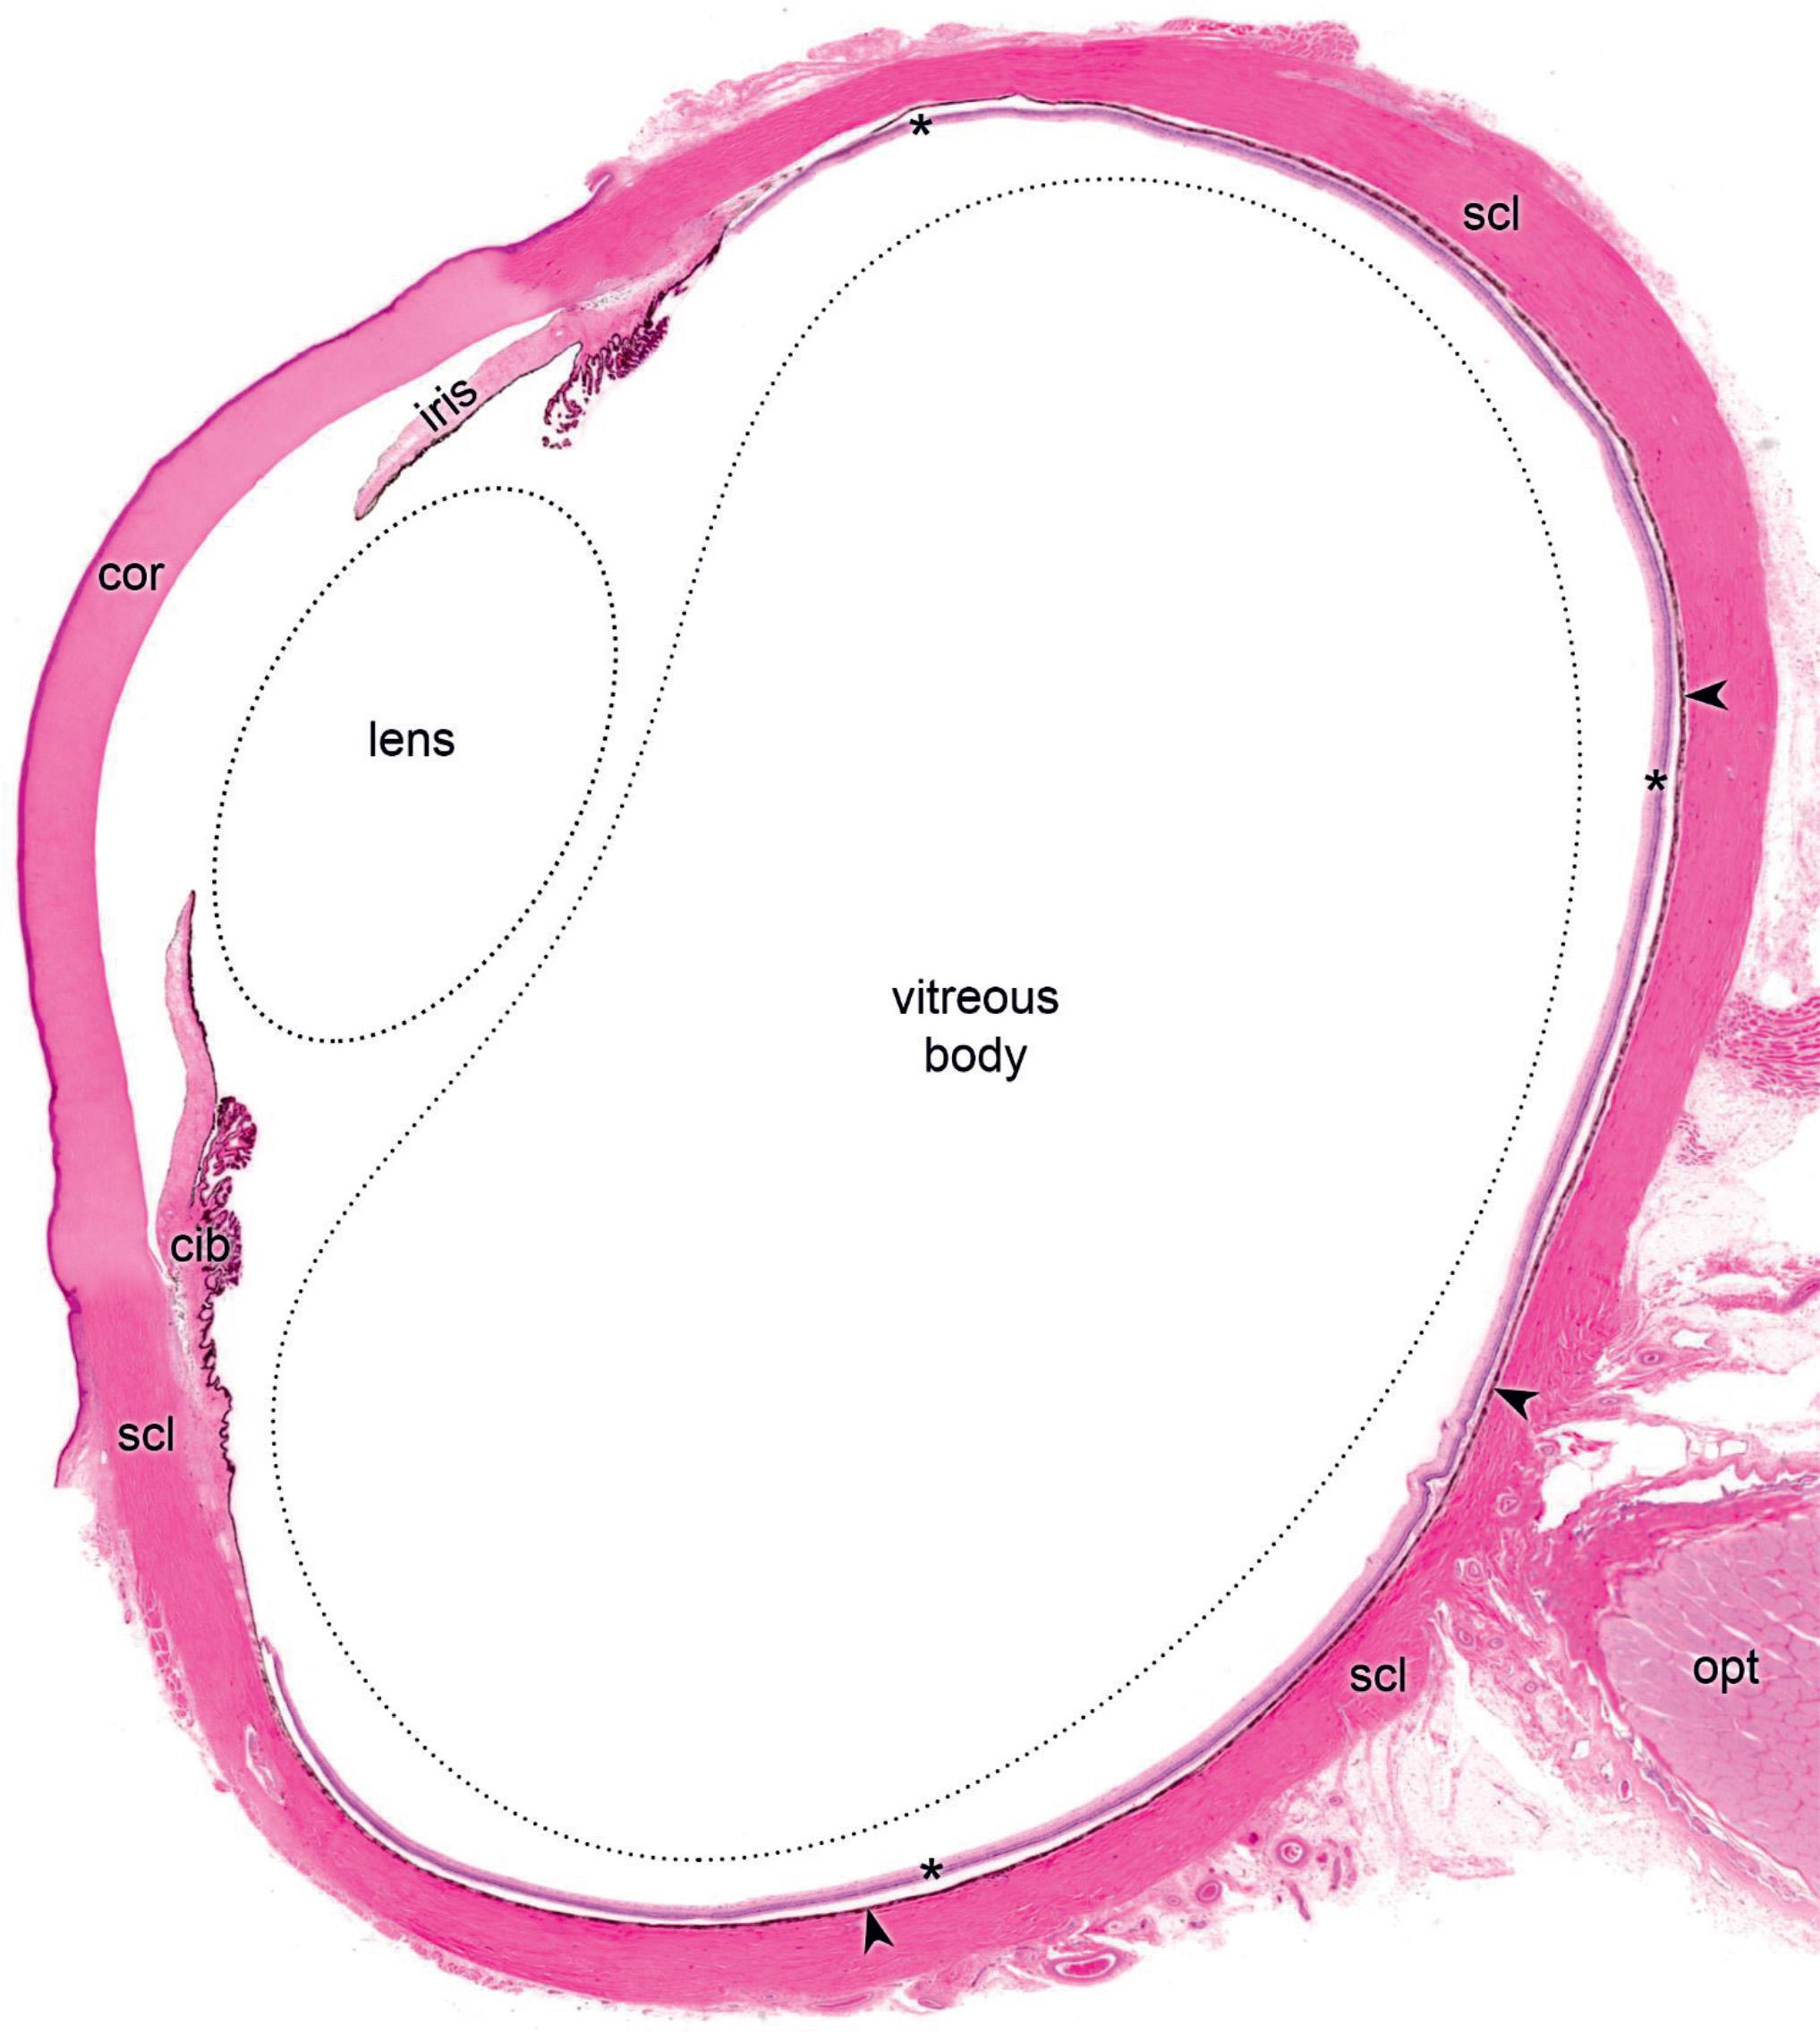 Figure 319, Eye. The eyeball is formed by three distinct layers. The outermost fibrous corneoscleral layer comprises the anterior, translucent cornea (cor) that continues into the posterior, nontransparent sclera (scl). The middle layer is the uvea, a vascular layer that also includes the posterior choroid (choroidea, arrowheads) as well as the stroma of the ciliary body (cib) and the iris anteriorly. The innermost coat is the retina (asterisks) that surrounds the vitreous chamber. Axons of the retinal ganglion cells form the optic nerve (opt). The chambers of the eye contain the anterior lens and the posterior vitreous body that are missing from this specimen, only their contours are shown; the eye is compressed anteroposteriorly due to the tissue preparation. Lens is an avascular structure and it is anchored to the ciliary body by the zonular fibers that end in the capsule of the lens. The capsule is a thick basal lamina that is formed by the underlying cuboidal epithelial cells (lens epithelium) that are located only on the anterior side of the lens. Similar to the lens, the vitreous body is a transparent structure that fills the space between the lens and the retina (vitreous chamber) and it is composed of a gelatinous substance rich in glycosaminoglycans that is surrounded by a delicate vitreous membrane formed by thin collagen fibers.